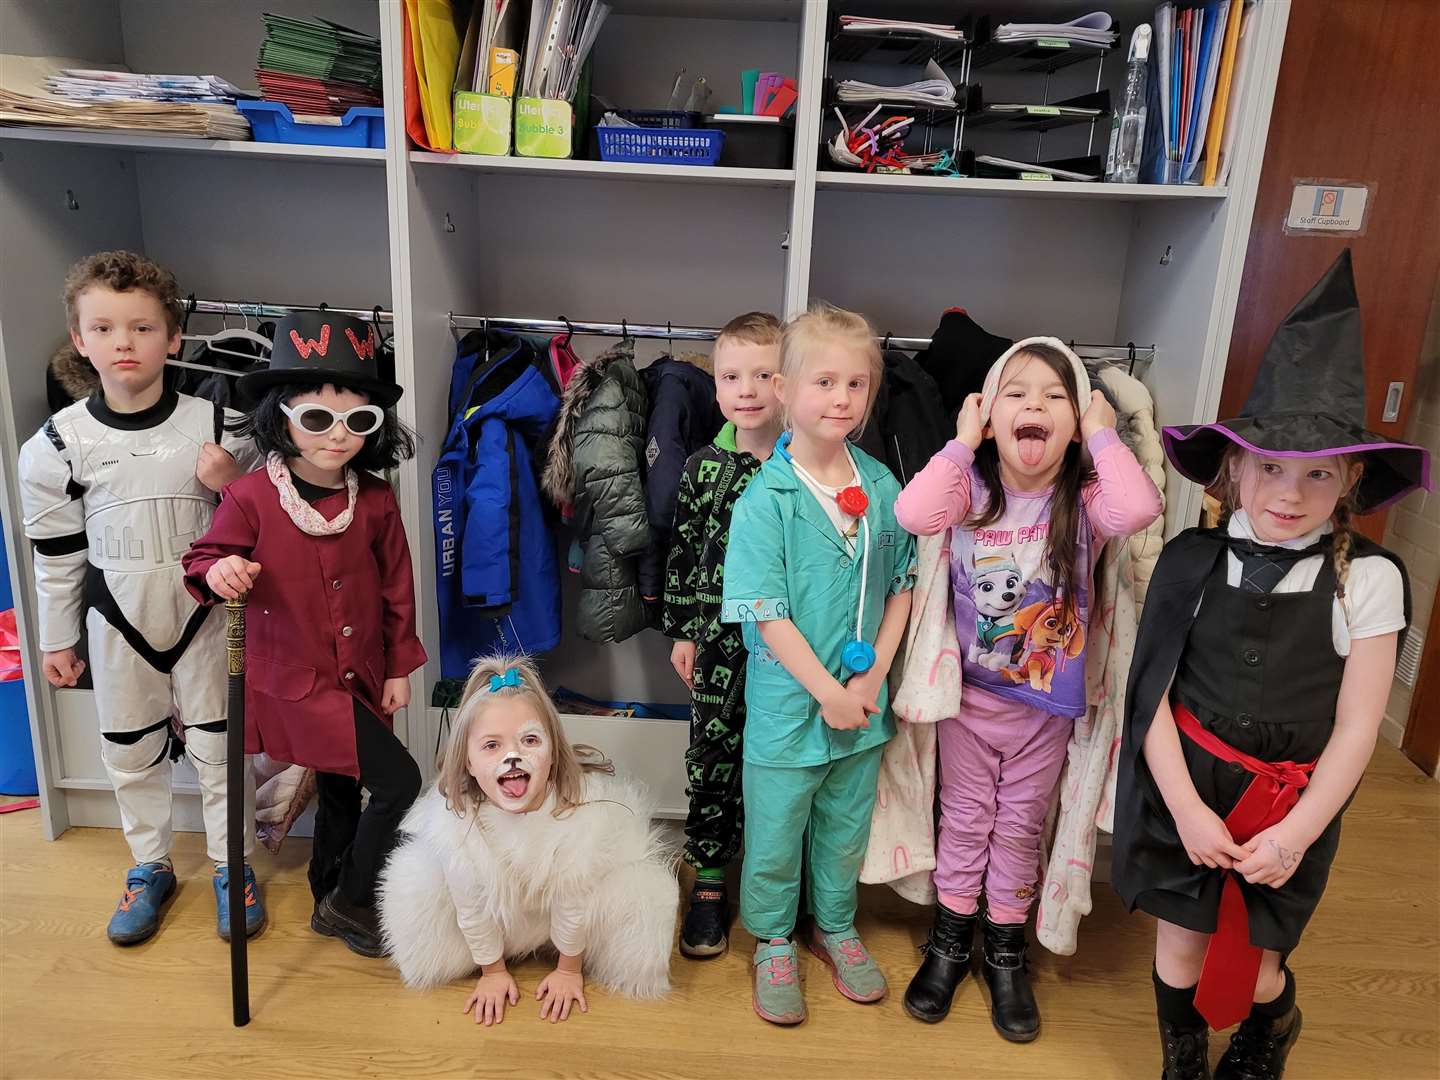 Pupils at Gordon Primary School wear costumes for World Book Day.